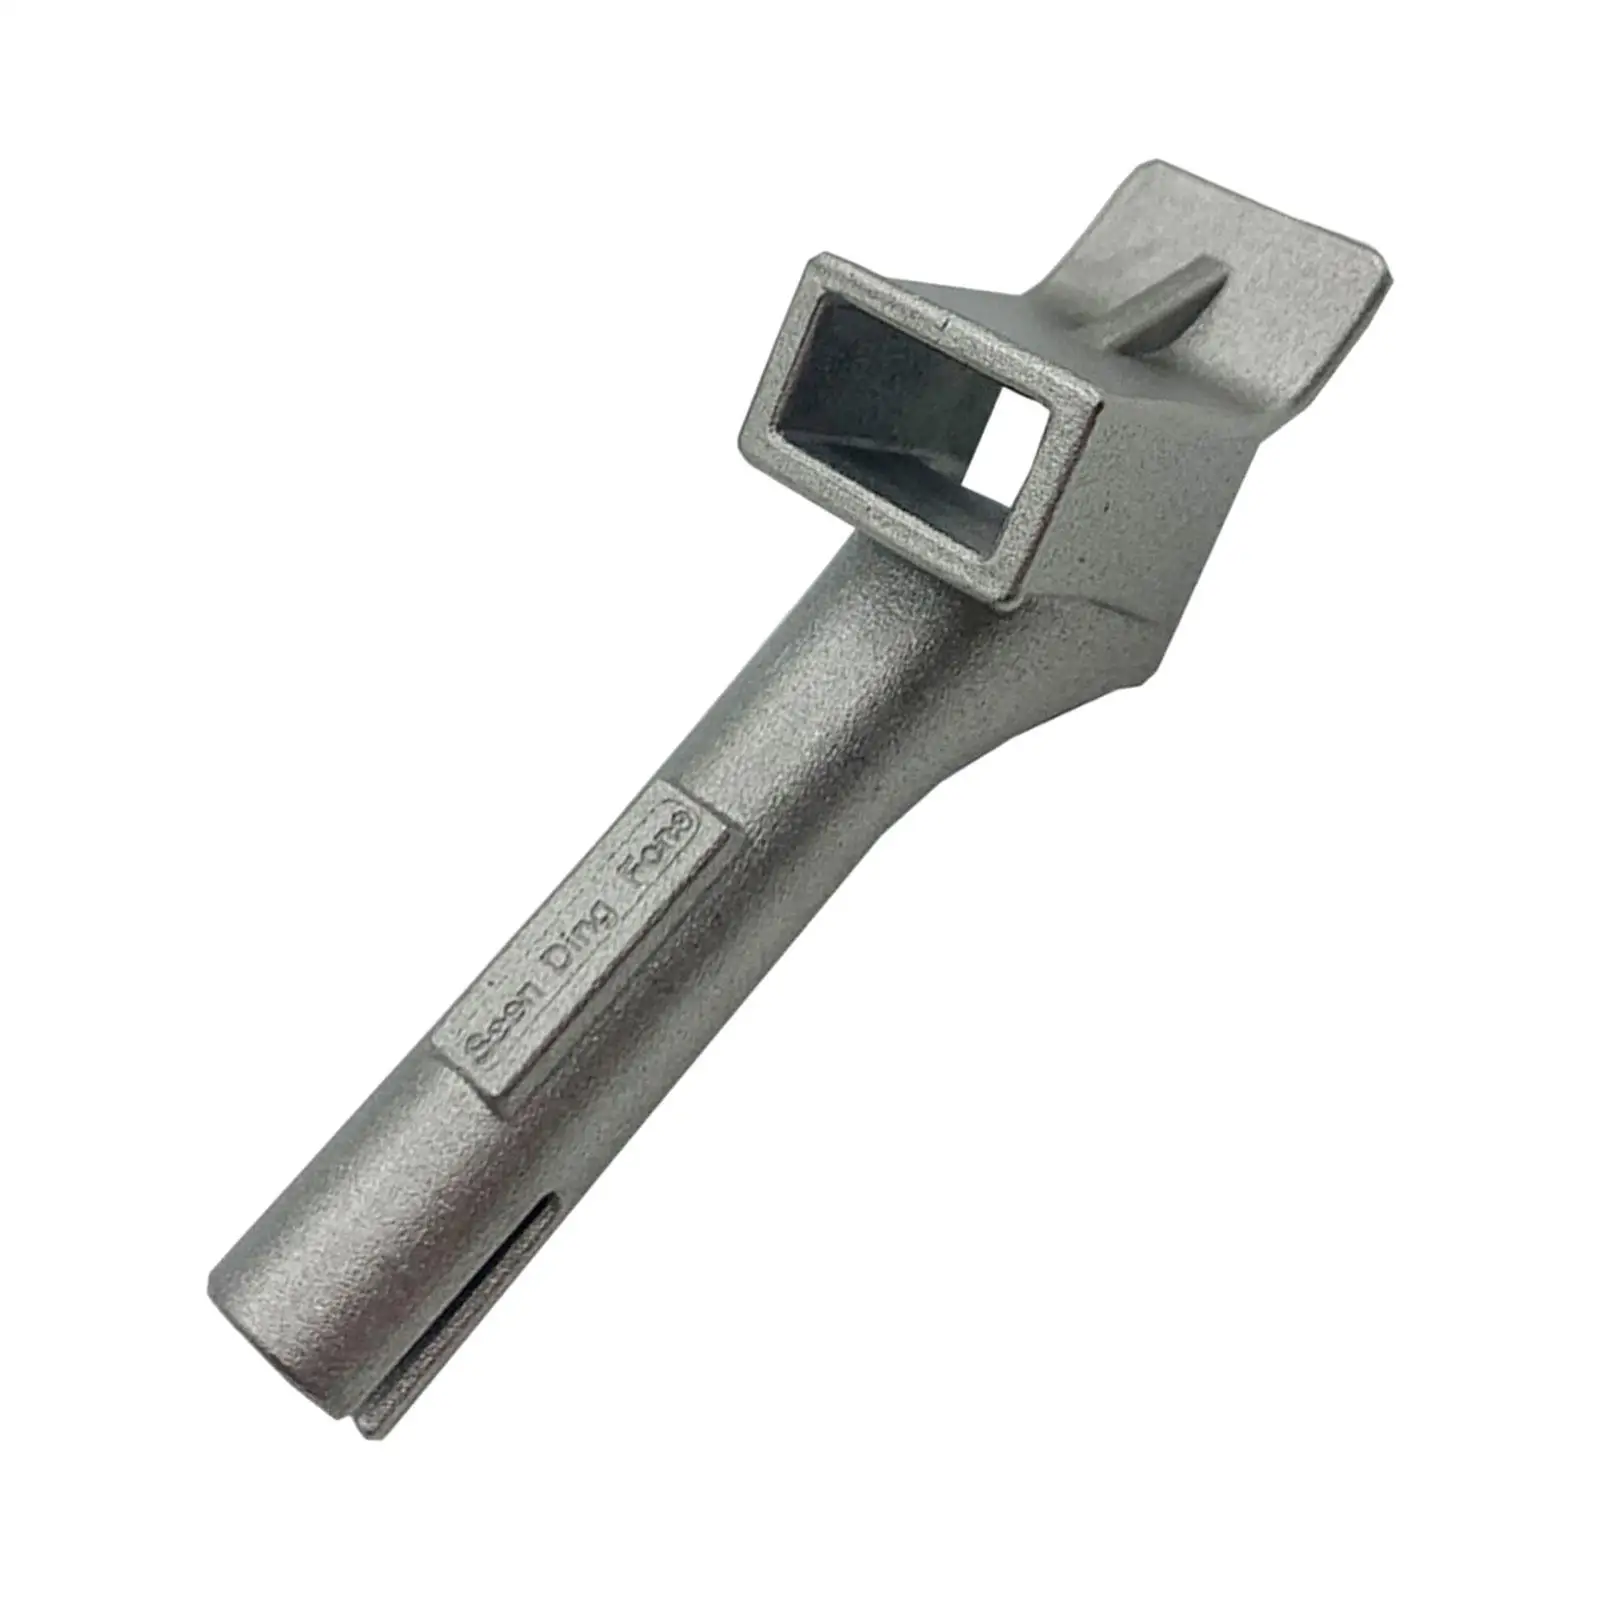 Welding Soldering Accessory Jerrican Stainless Steel Rusting Resistance Heat Blower Attachments for Soldering DIY Shrink Wrap